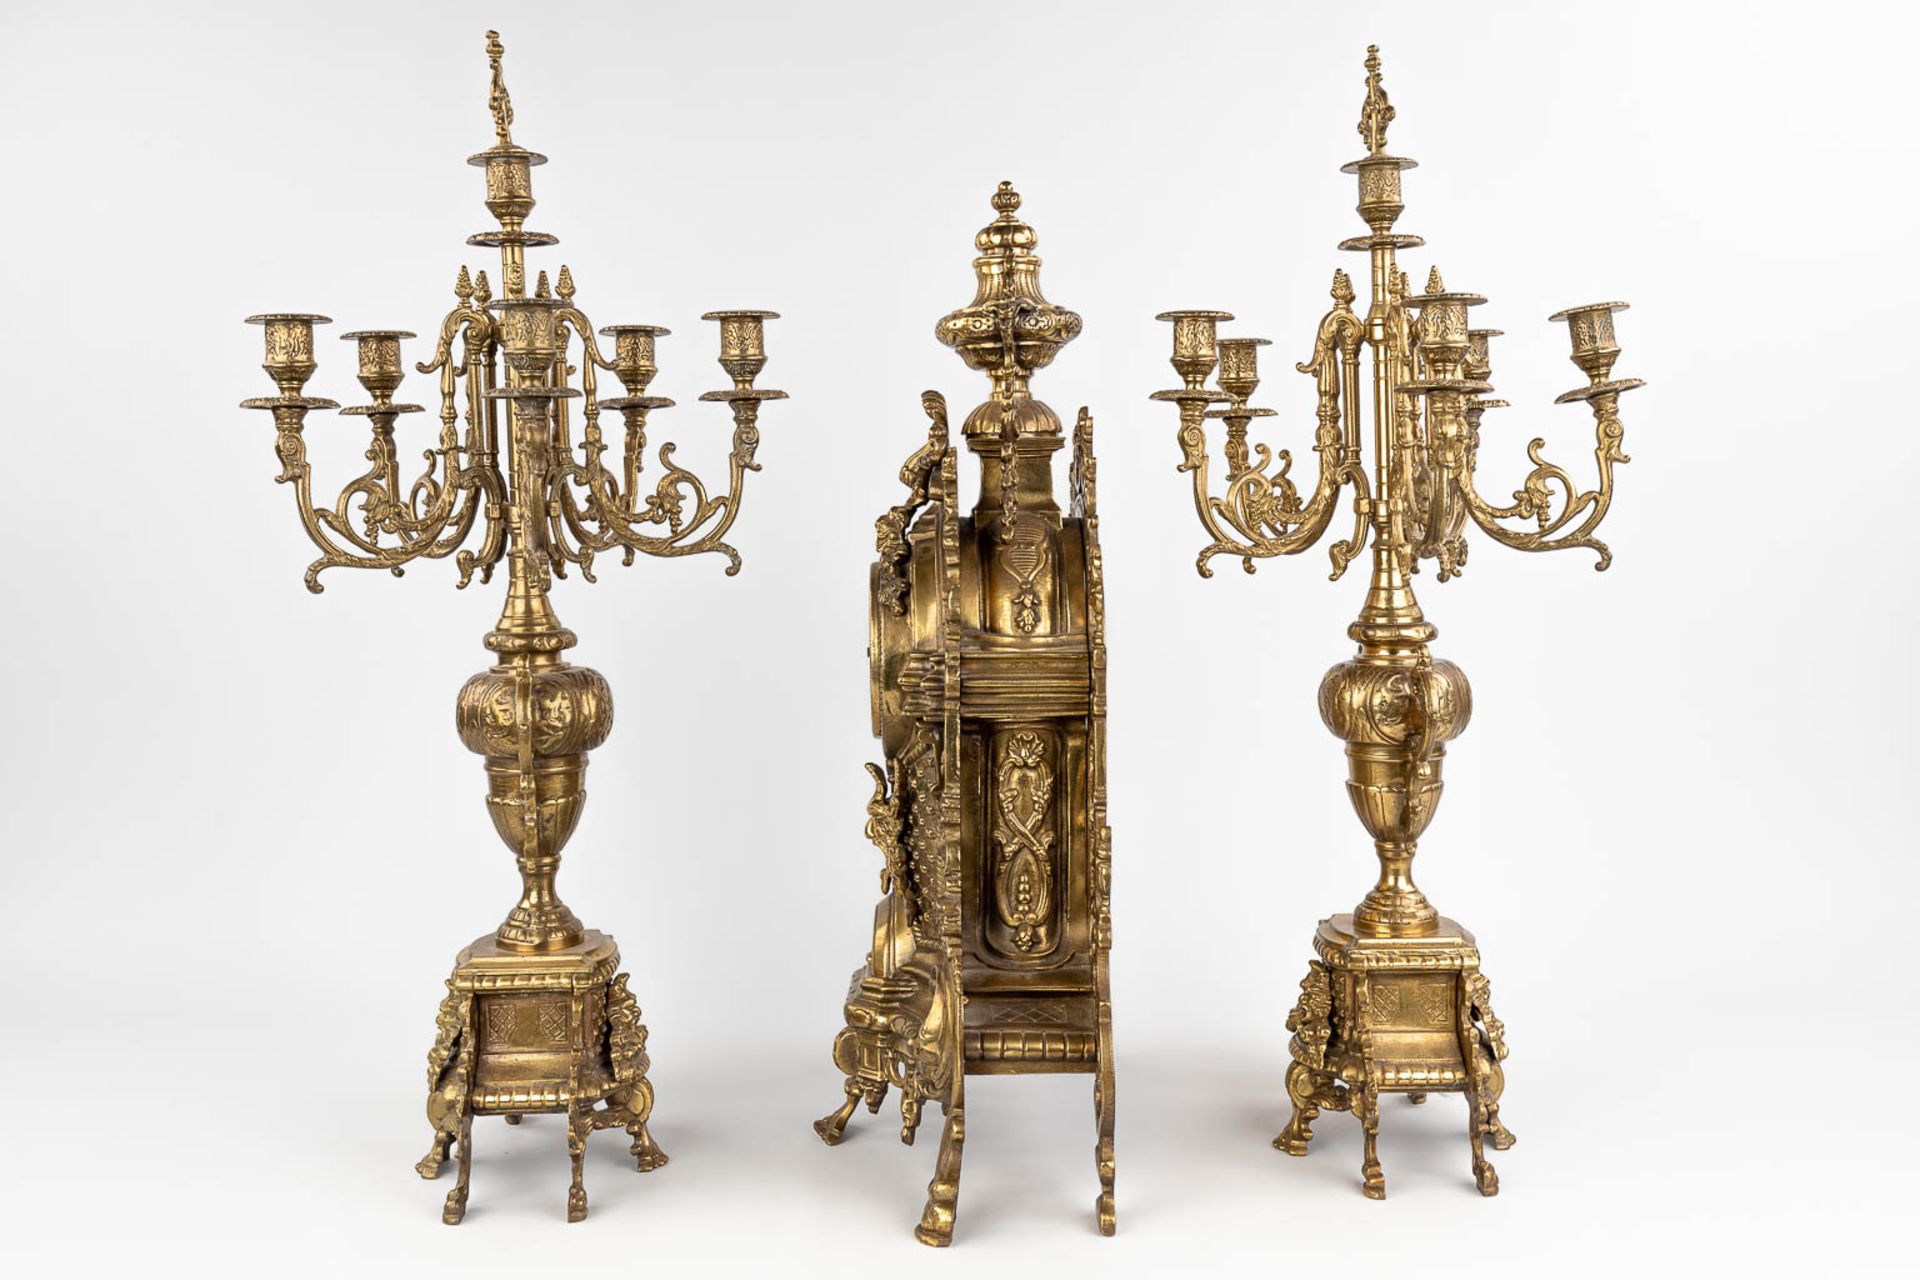 A three-piece mantle garniture consisting of a clock with candelabra, made of bronze. circa 1970. (W - Image 7 of 16